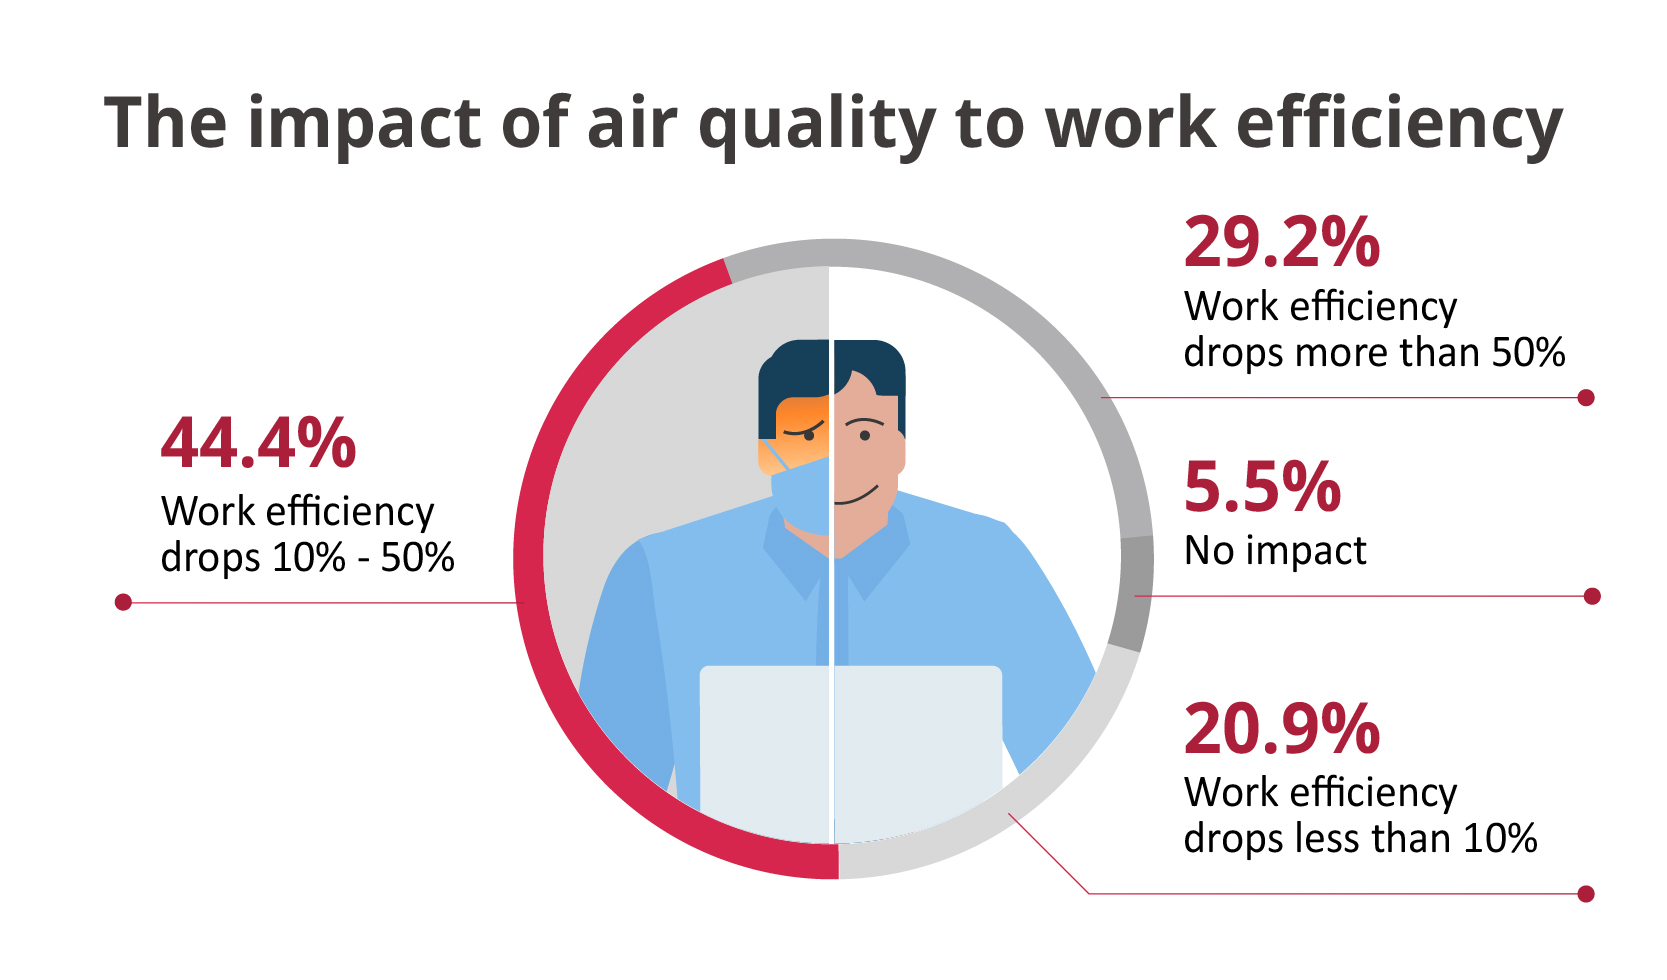 The impact of air quality to work efficiency